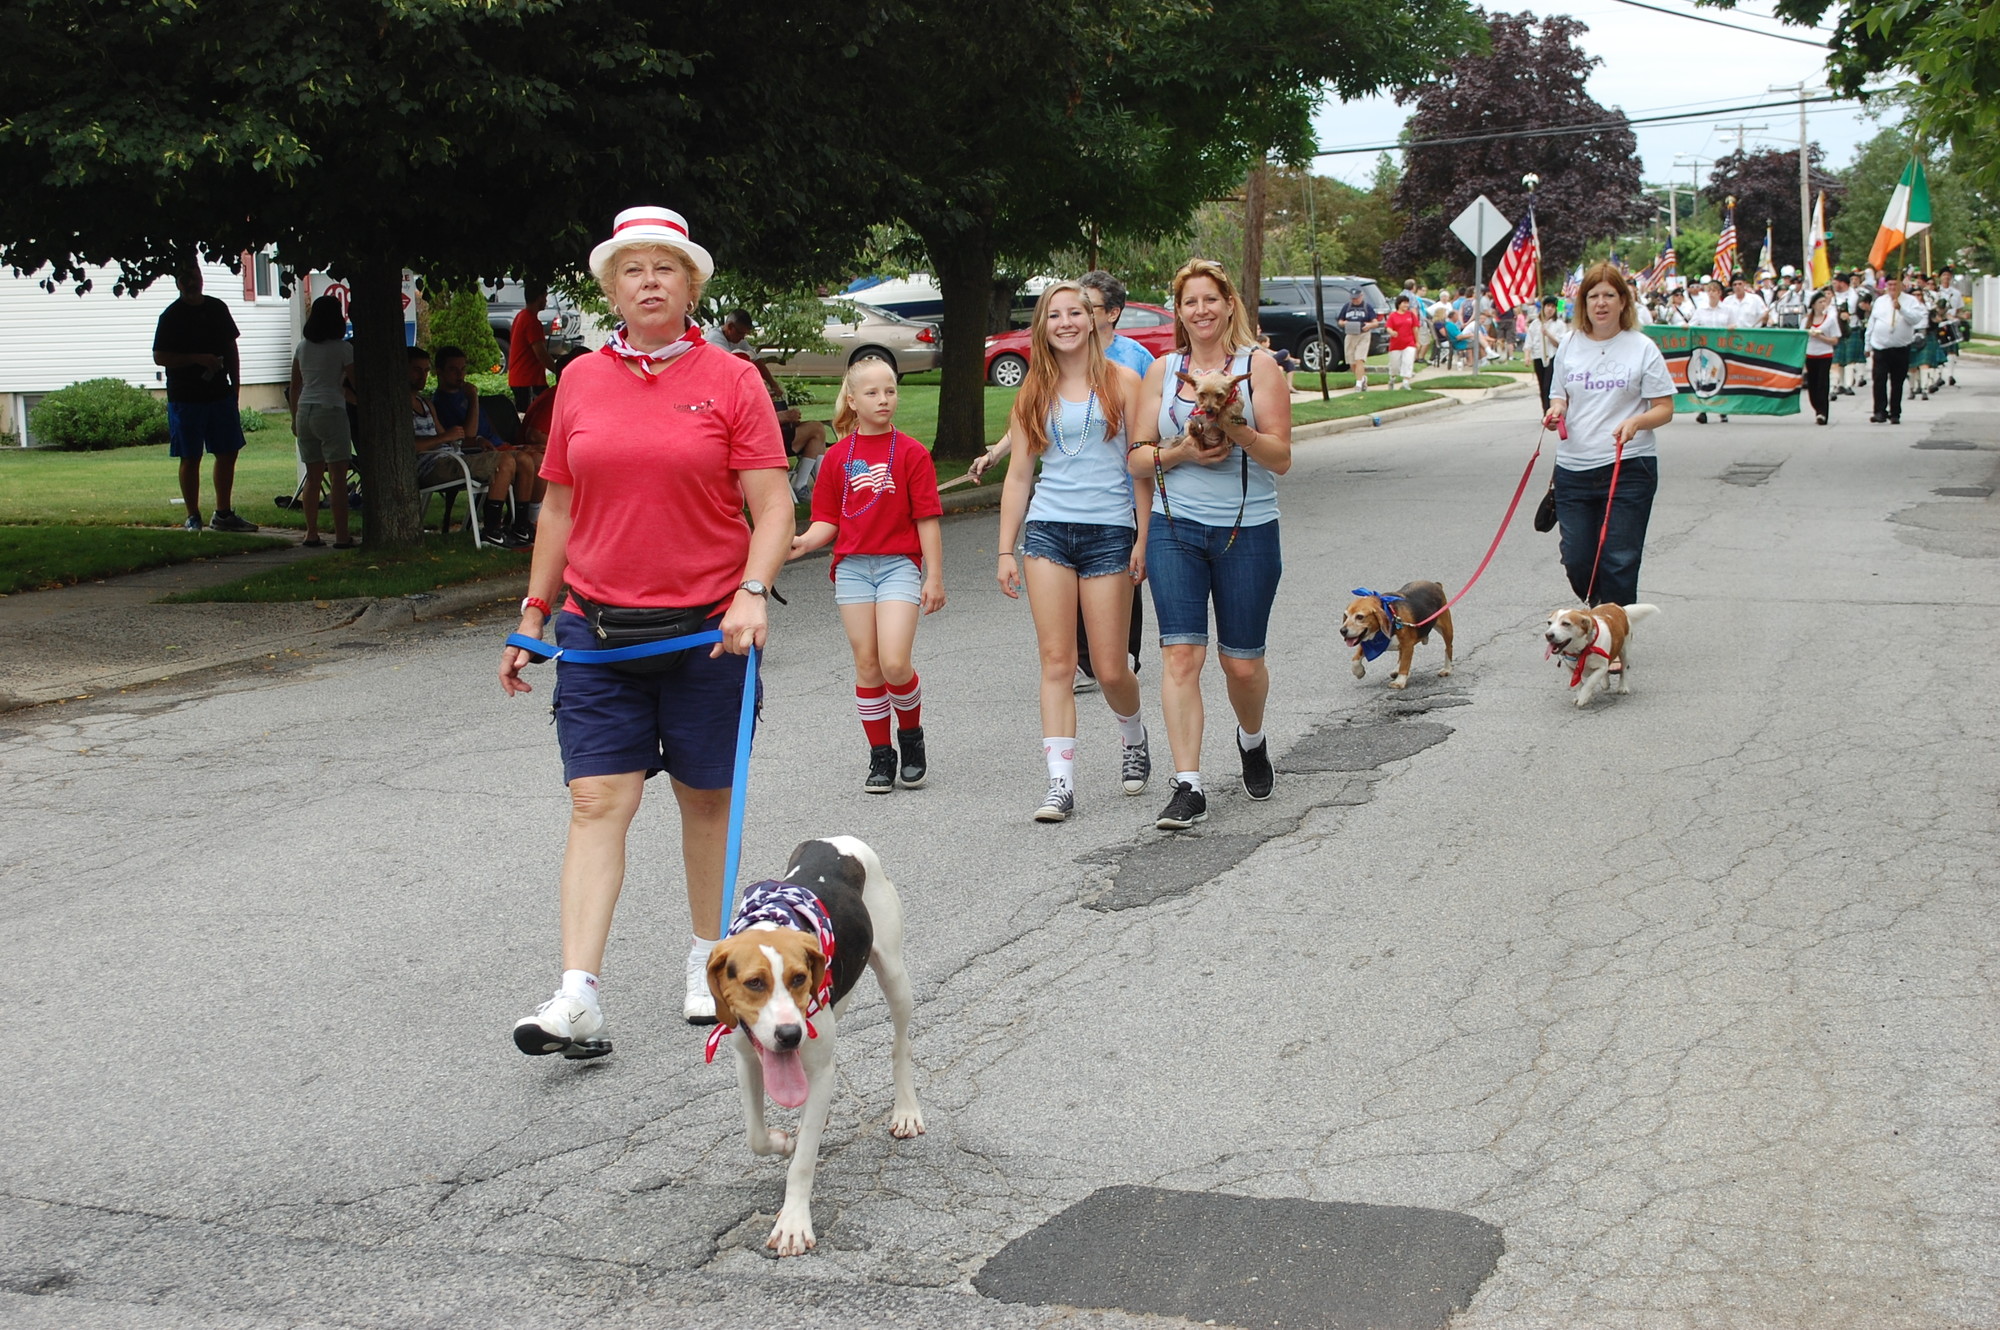 Volunteers from Last Hope Animal Rescue took part in the community’s annual Fourth of July parade to show the crowd there are lovable pets up for adoption right in Wantagh.